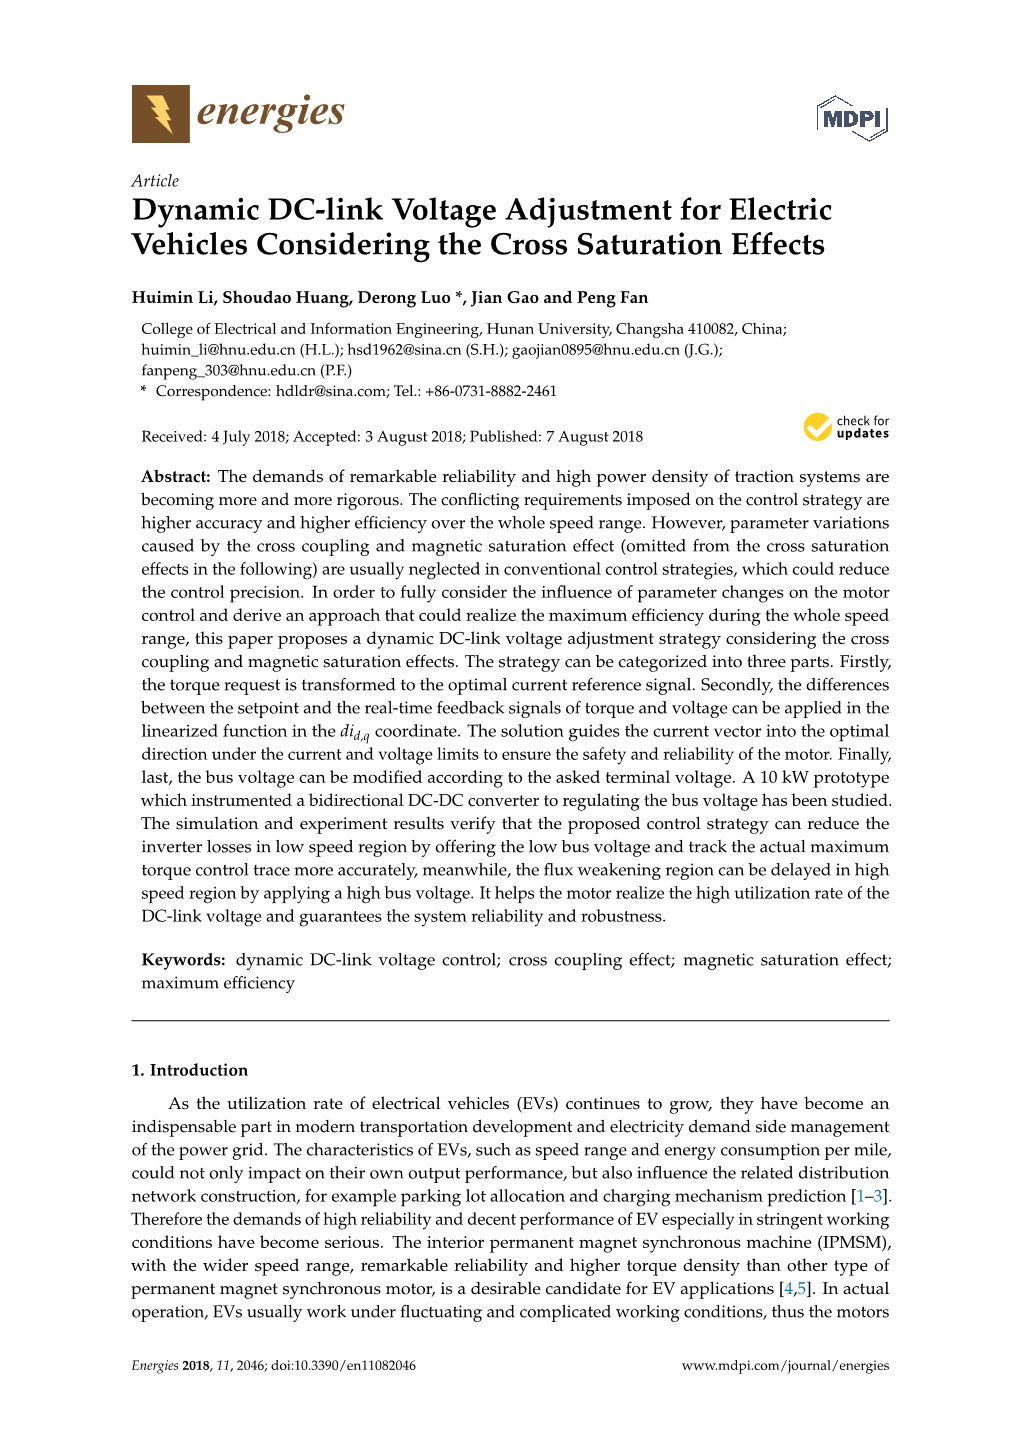 Dynamic DC-Link Voltage Adjustment for Electric Vehicles Considering the Cross Saturation Effects